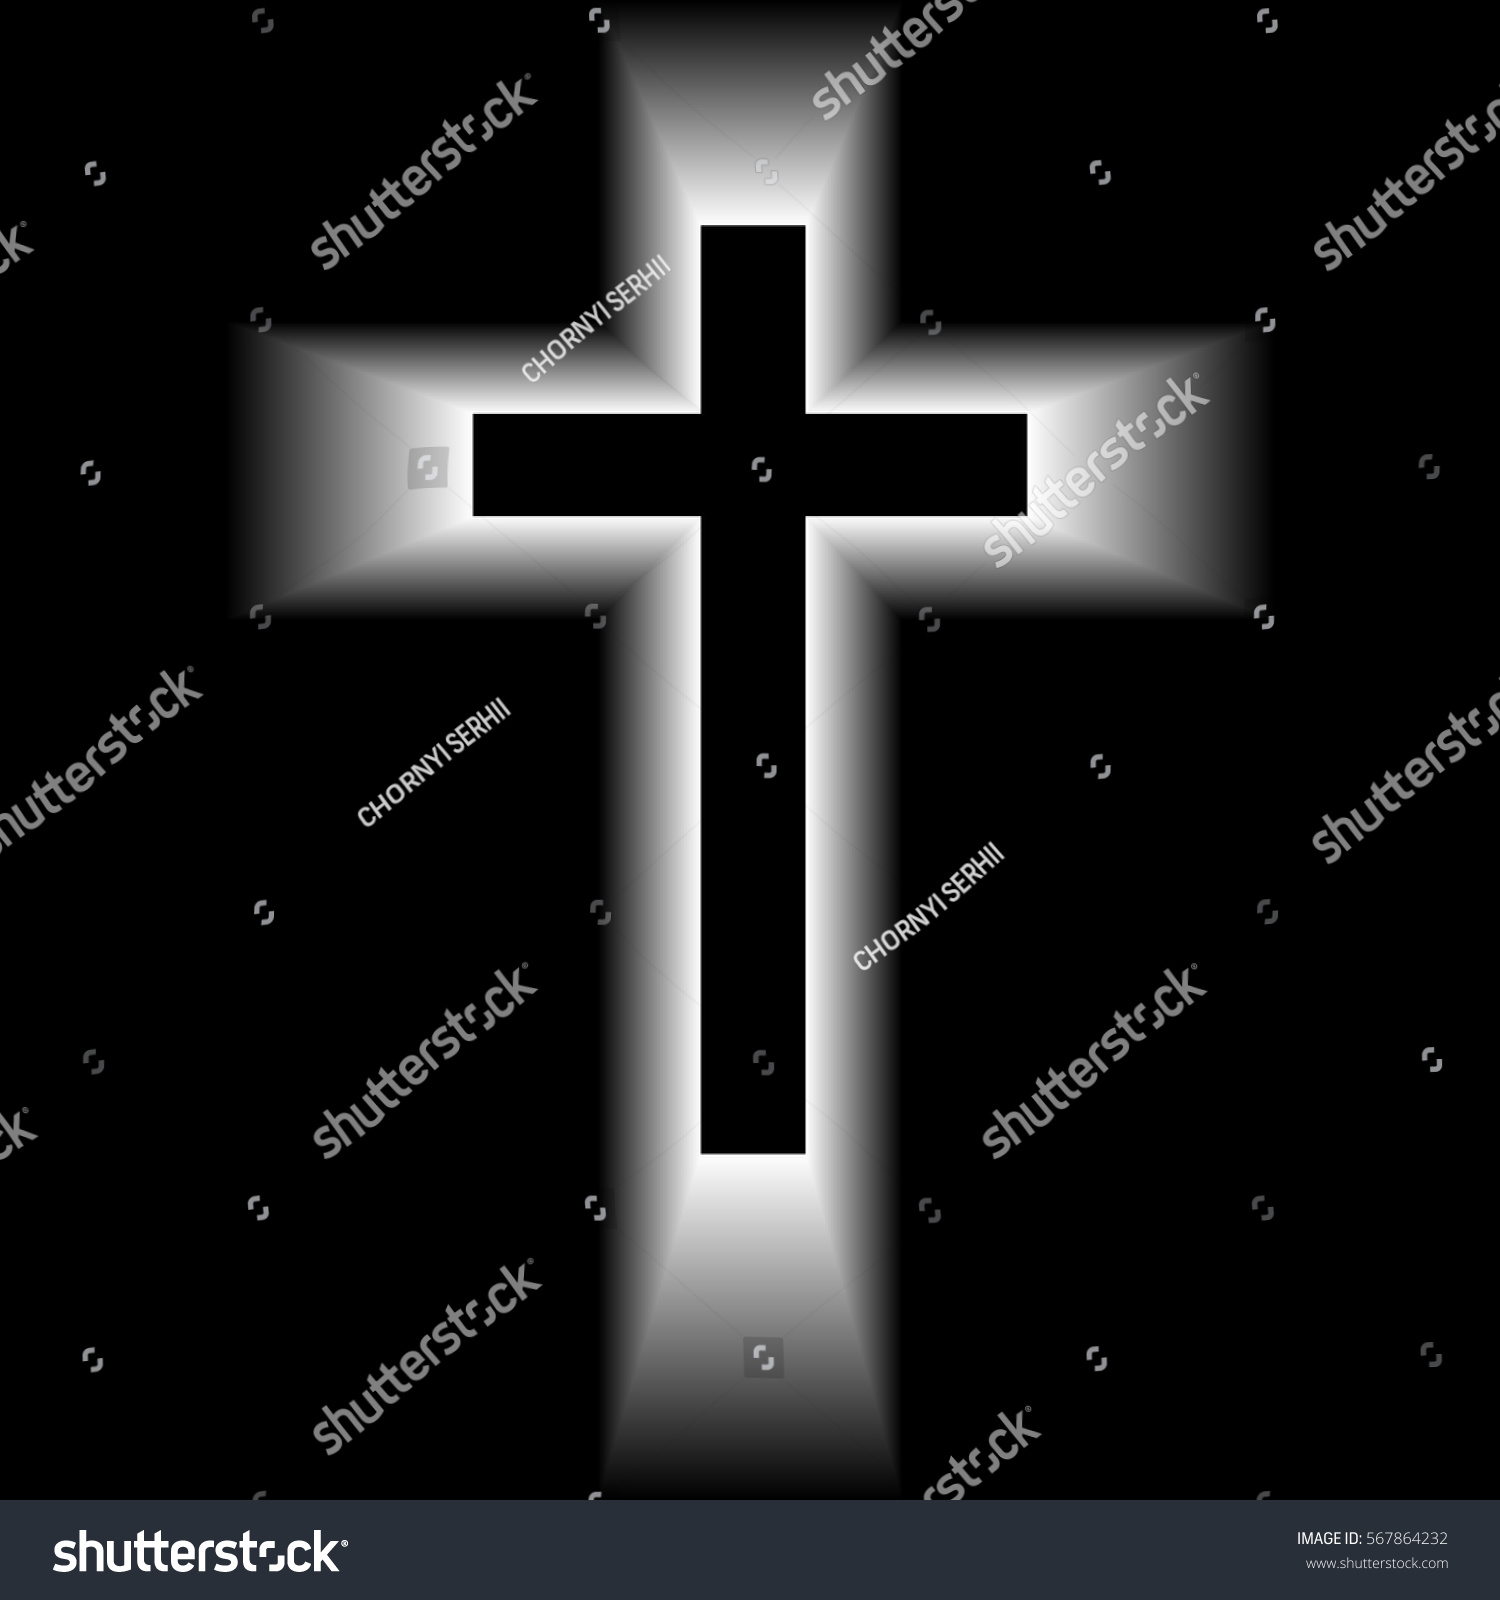 Abstract cross. Abstract background. gradient. #567864232